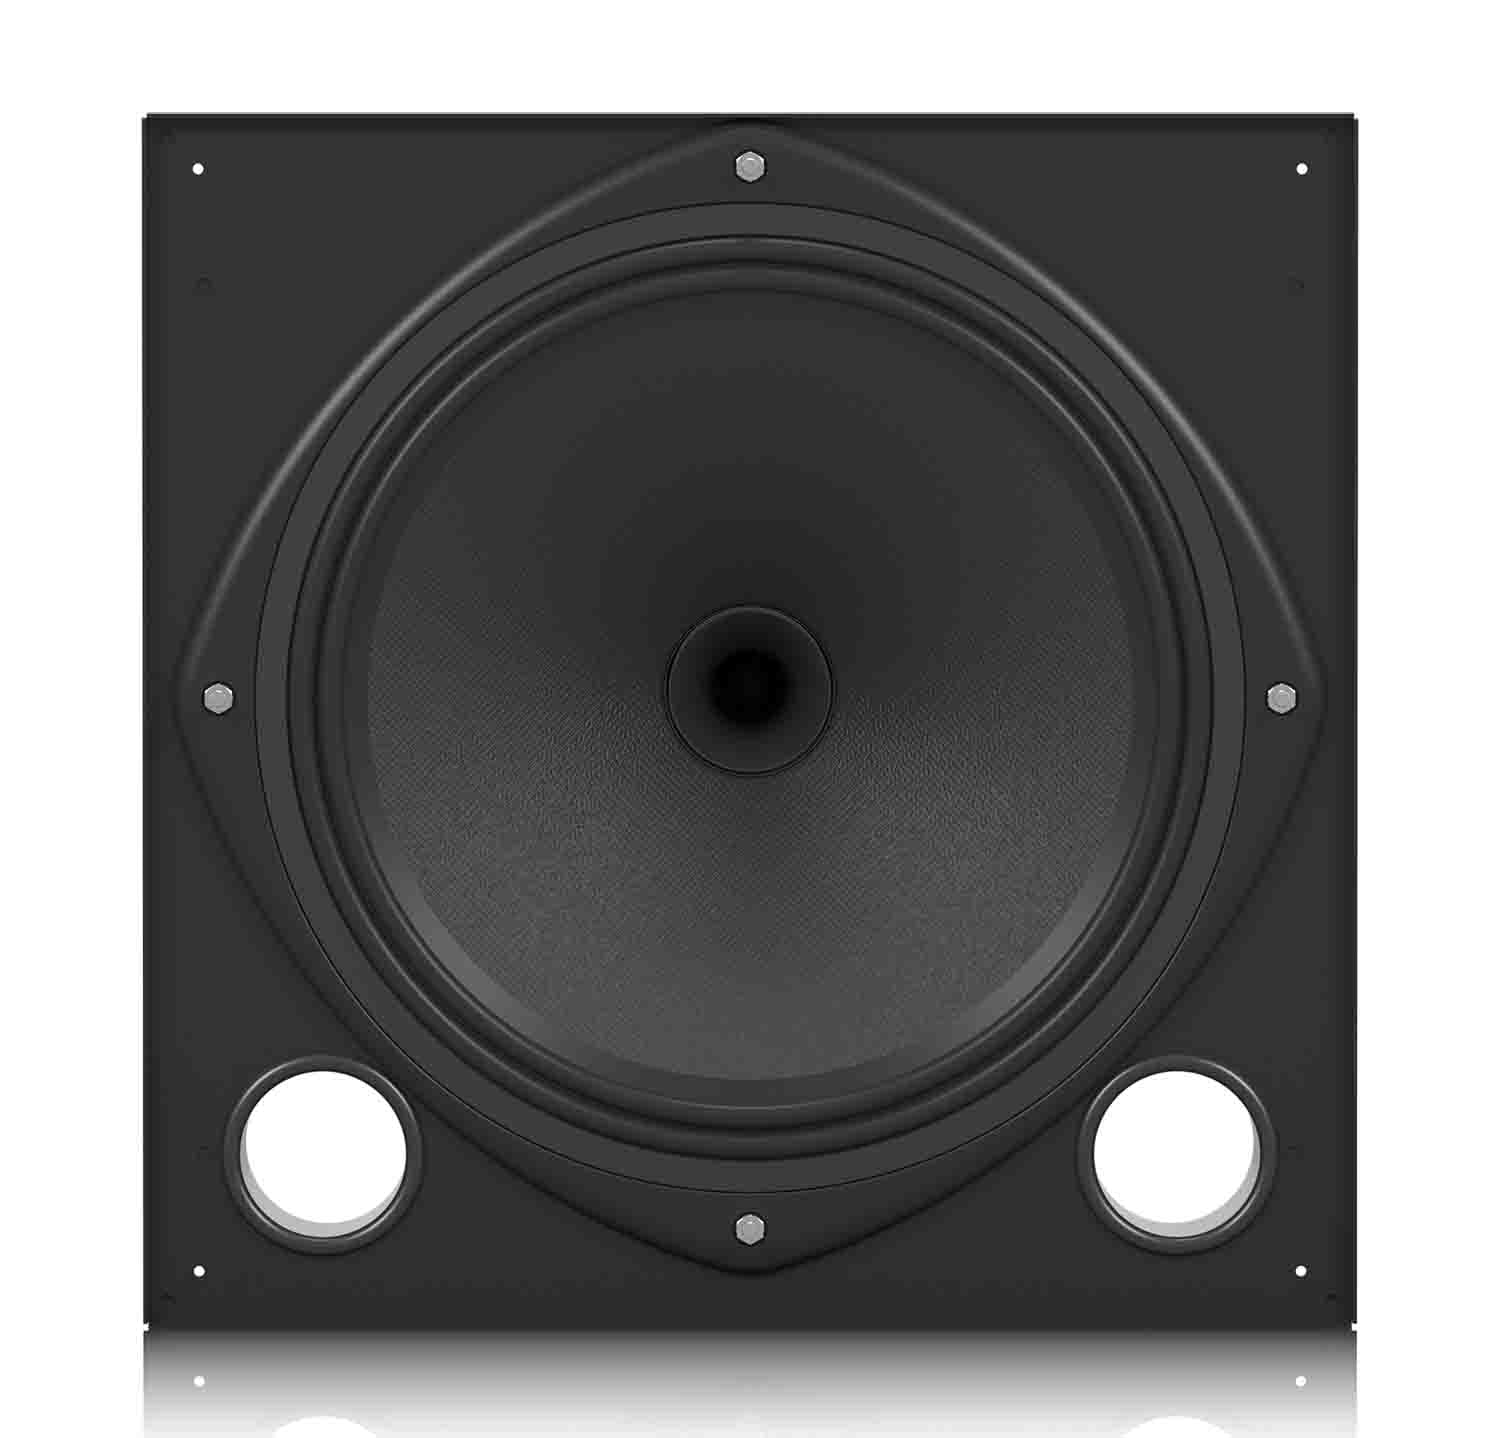 Tannoy CMS 1201DCT 12-Inch Full Range Ceiling Loudspeaker with Dual Concentric Driver - Black - Hollywood DJ